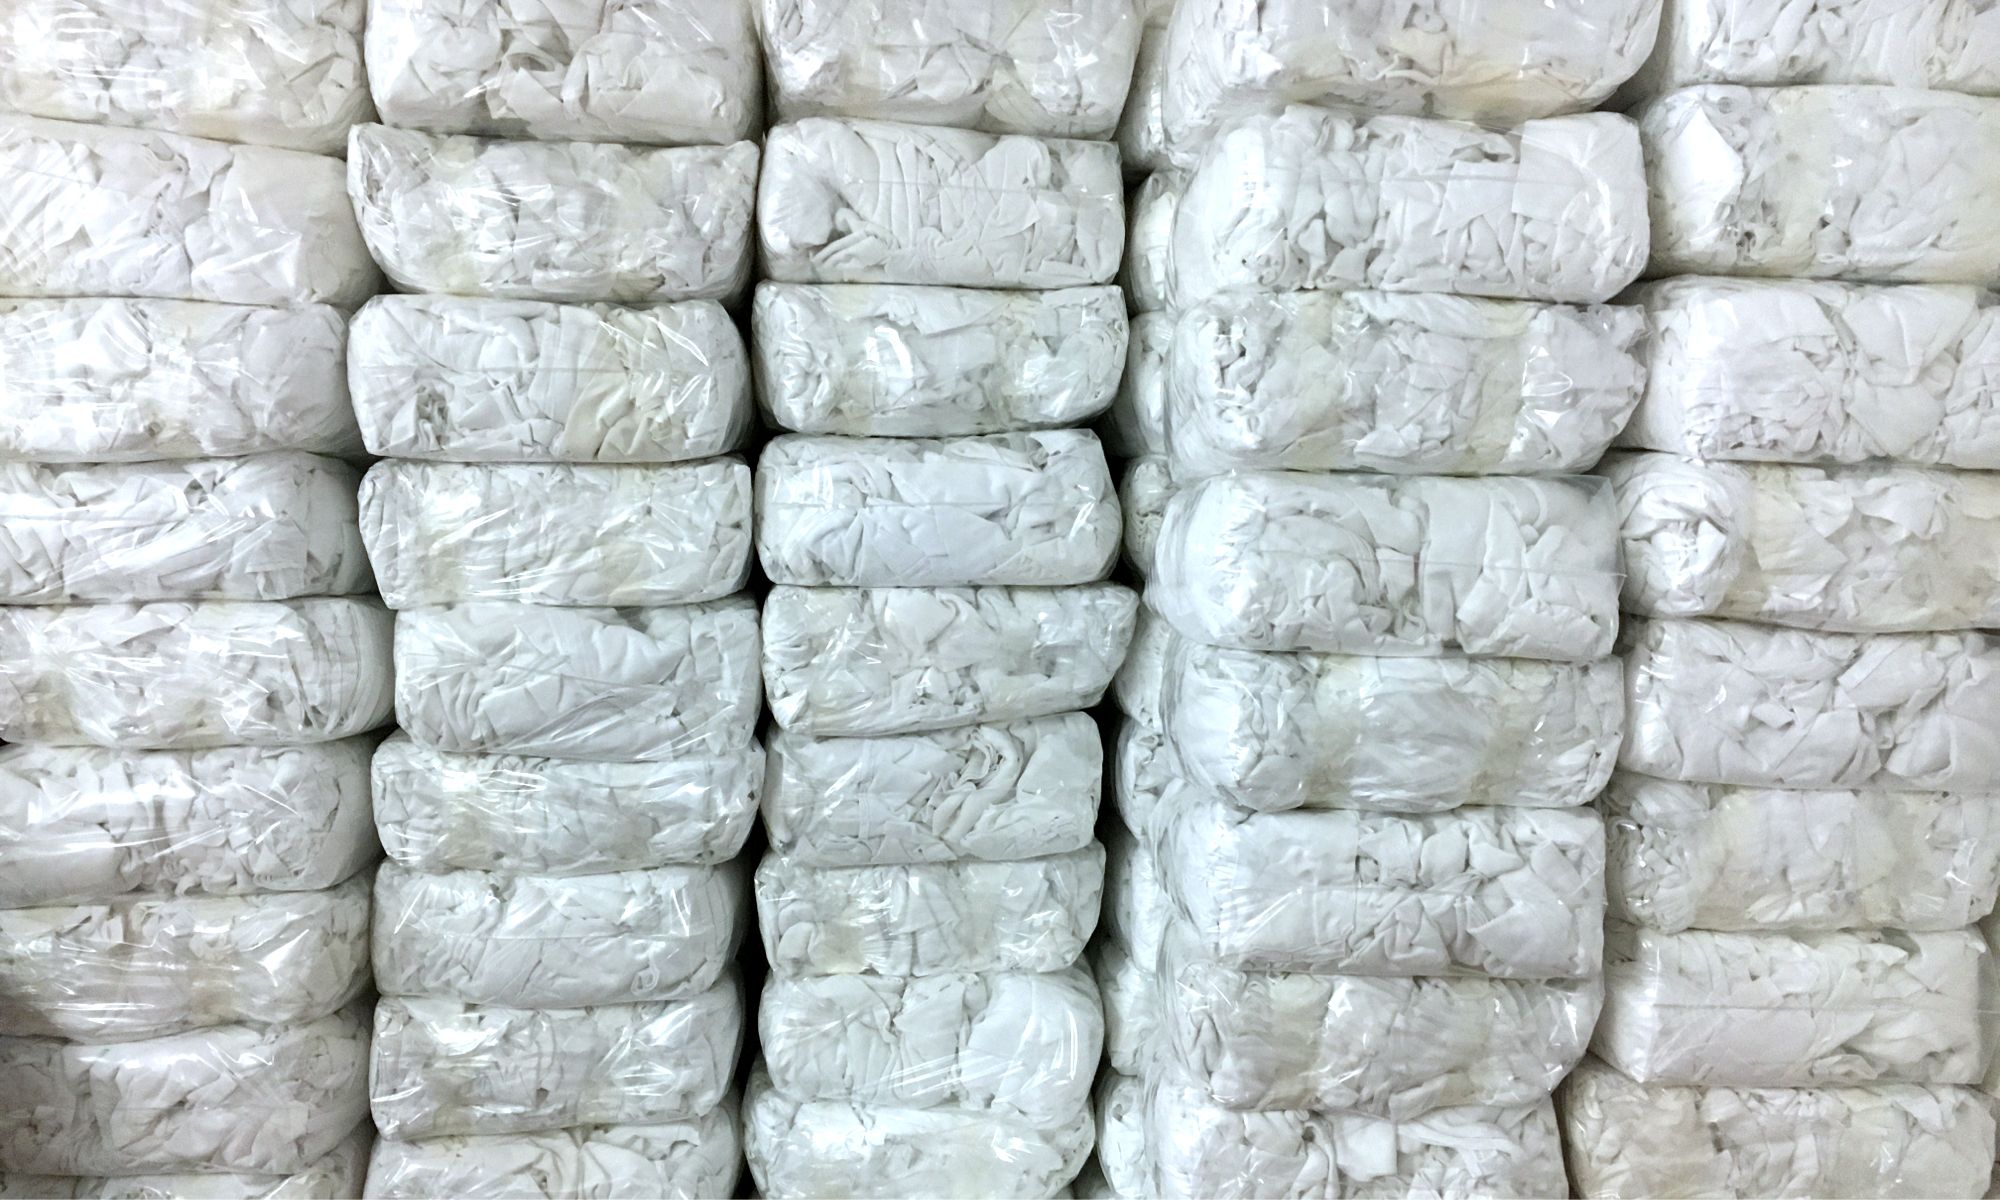 White Linen rags in the warehouse at KKC, Janitorial Supplies &  Health & Safety Products, Co. Kildare, Ireland